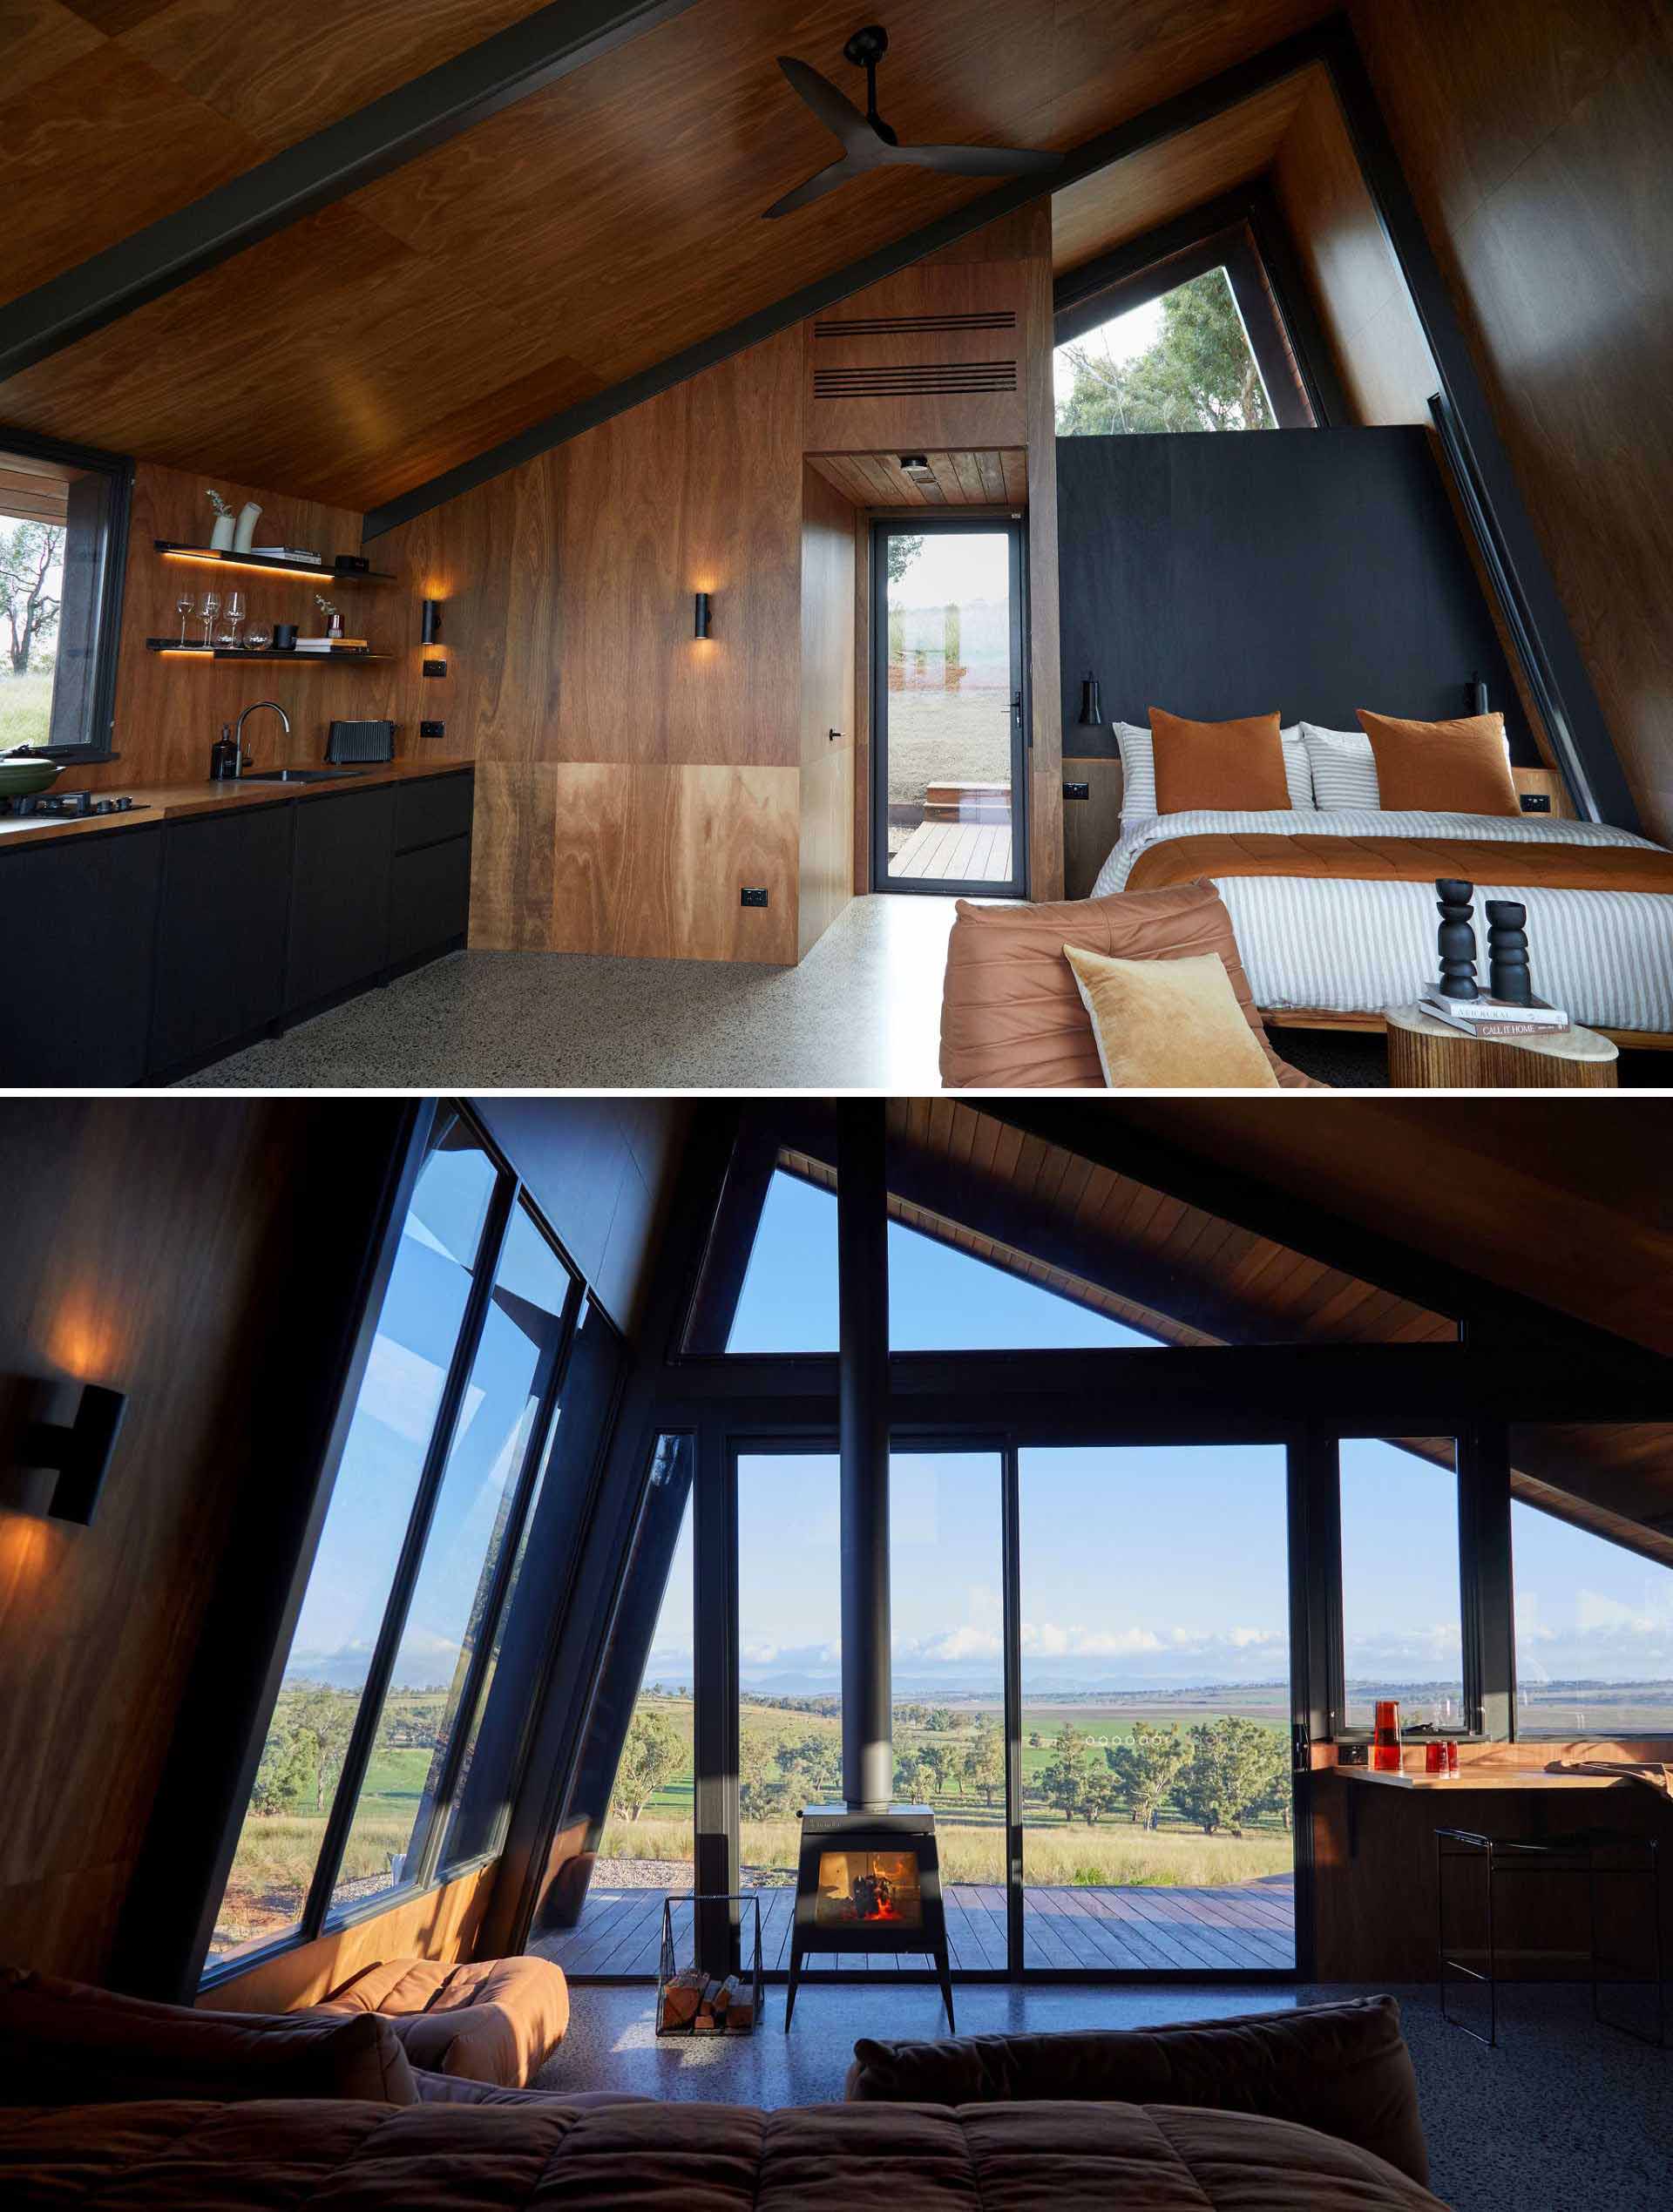 The interior of this small modern cabin is largely open-plan, with a sleeping ،e within the main living area.